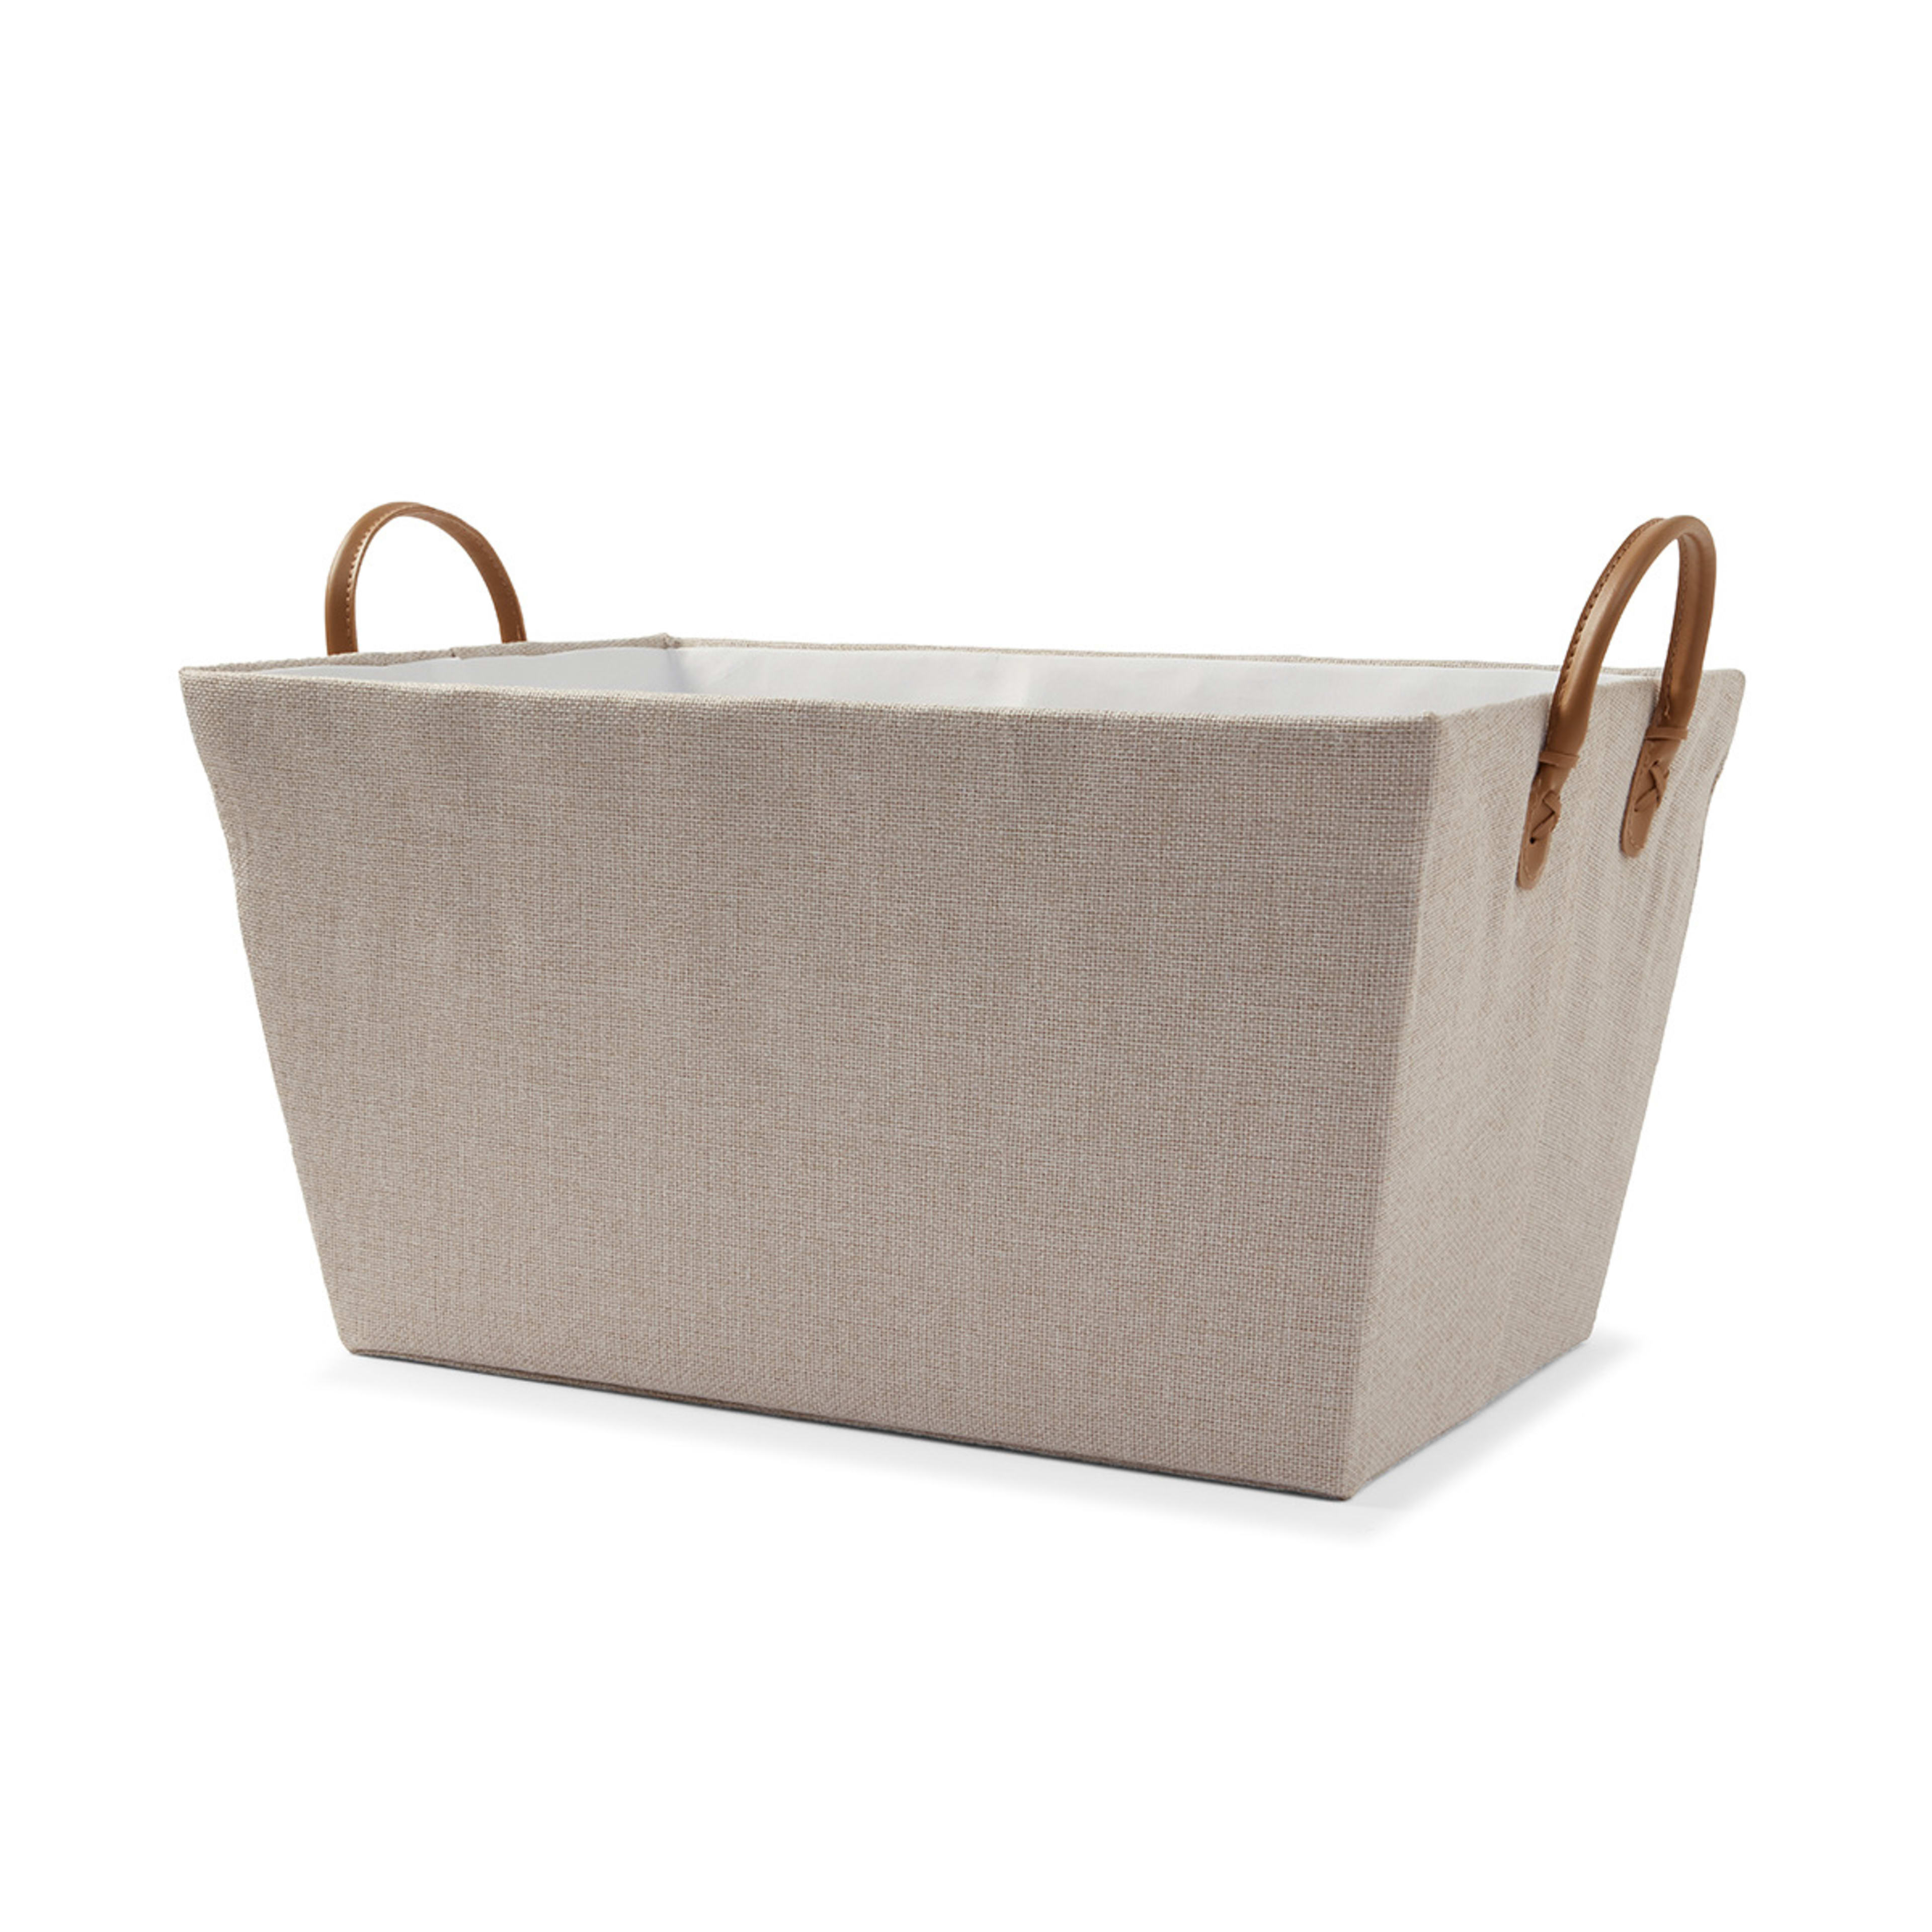 Linen Look Tapered Rectangle Basket - White and Beige - Kmart NZ